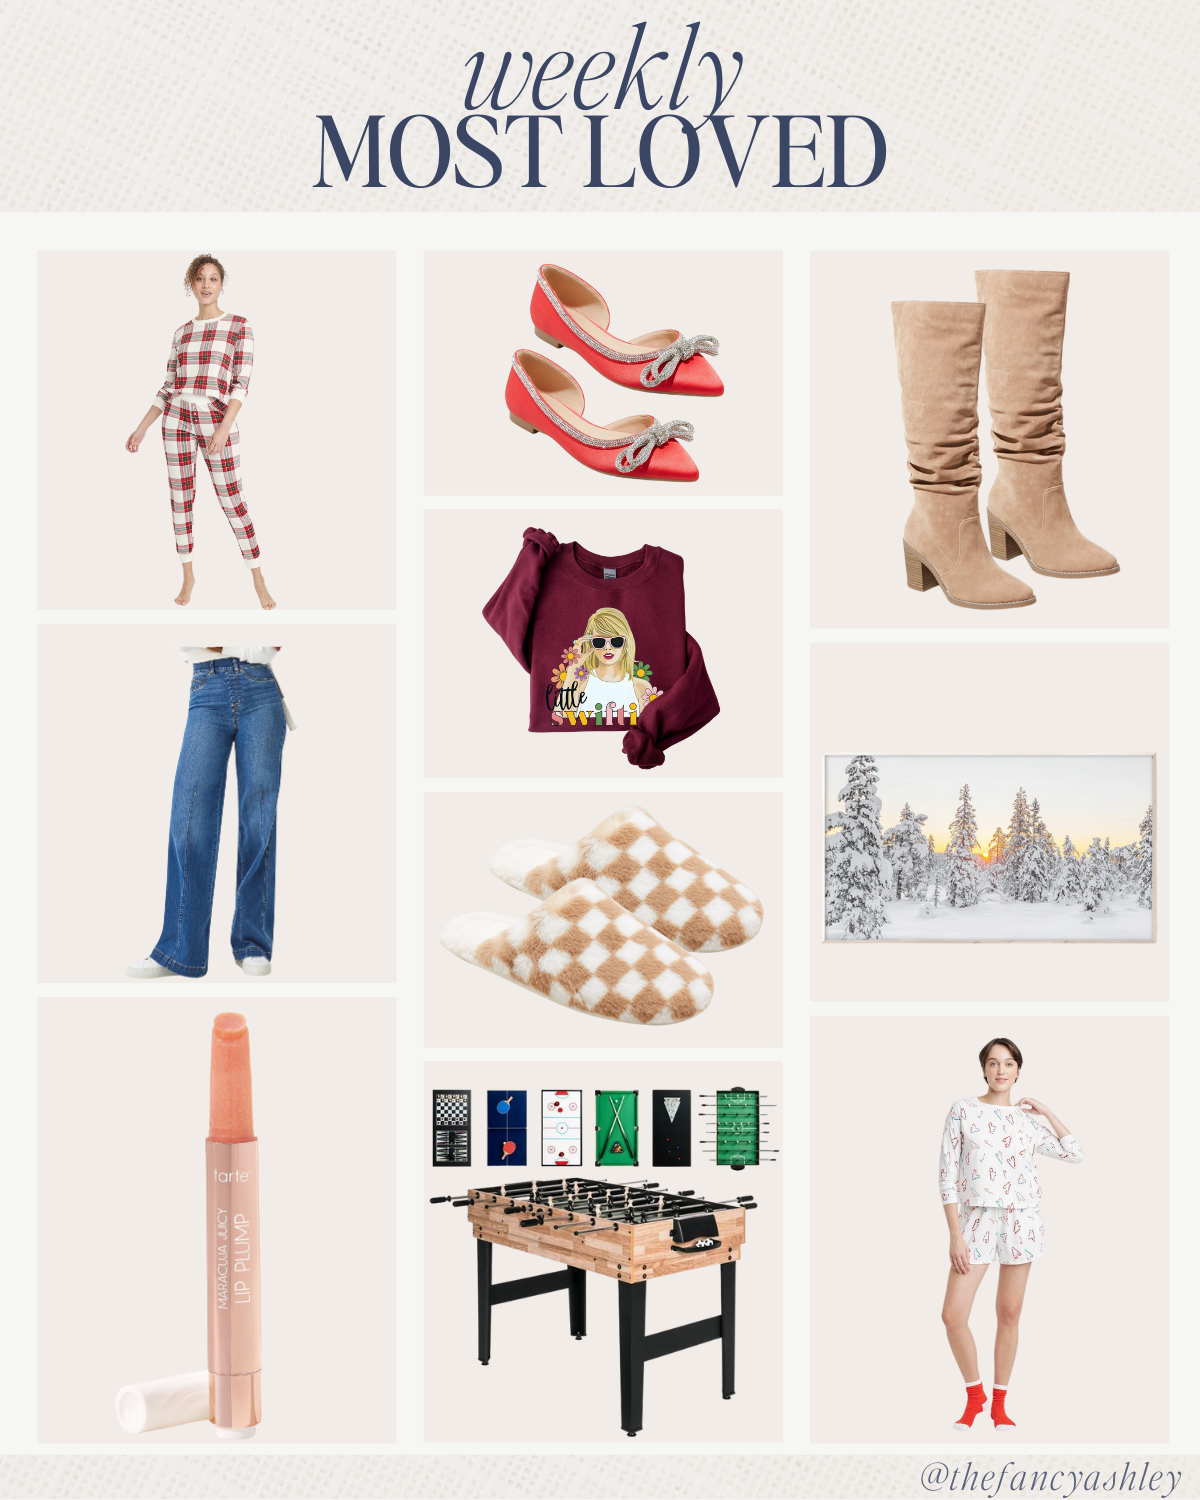 YOUR WEEKLY MOST LOVED FROM THE WEEK